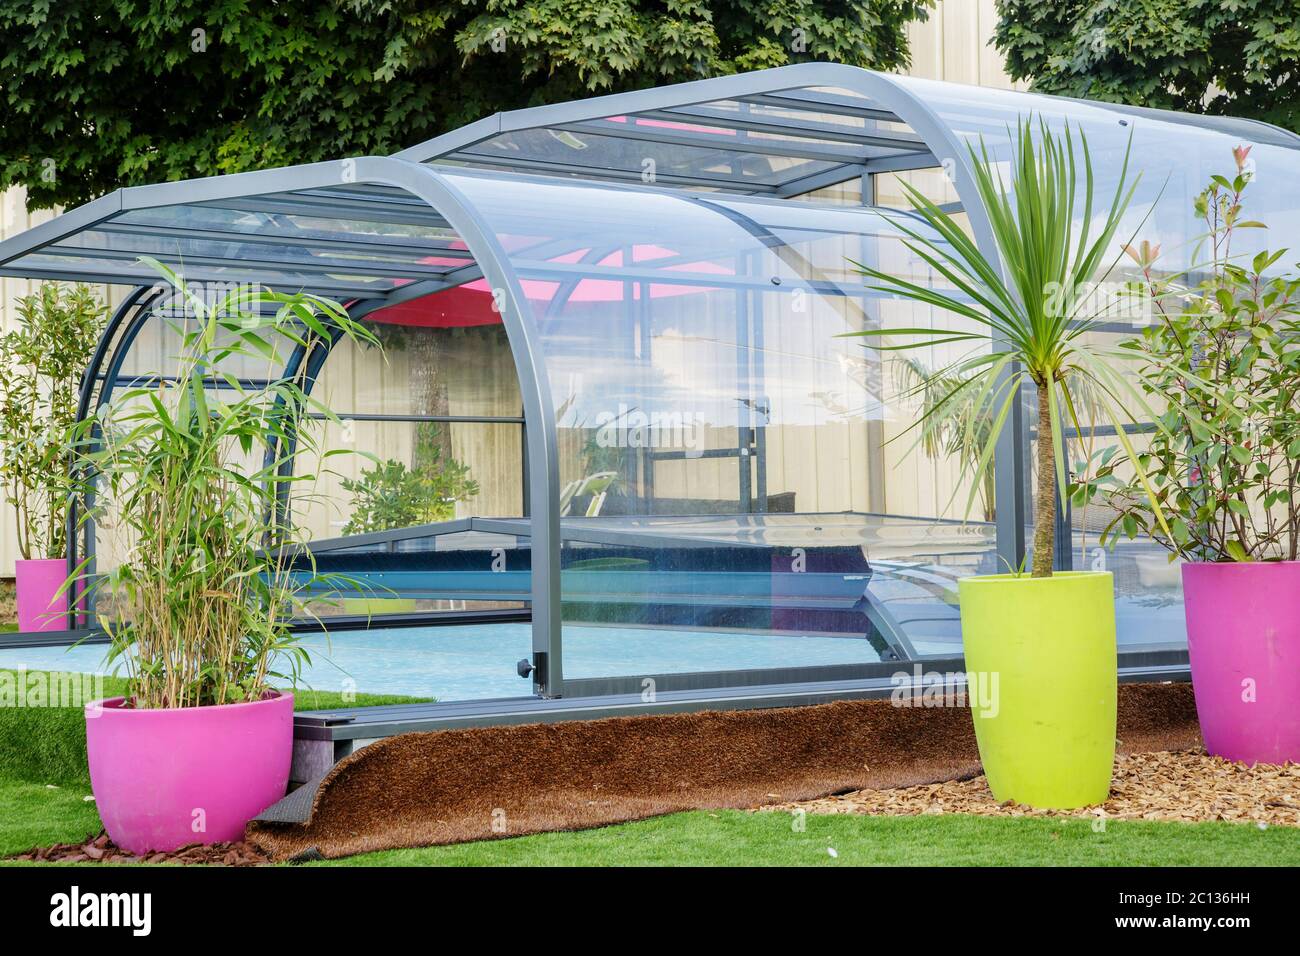 La rochelle, France - Aug 30, 2016: automatic retractable pool enclosure system to protect pool Stock Photo